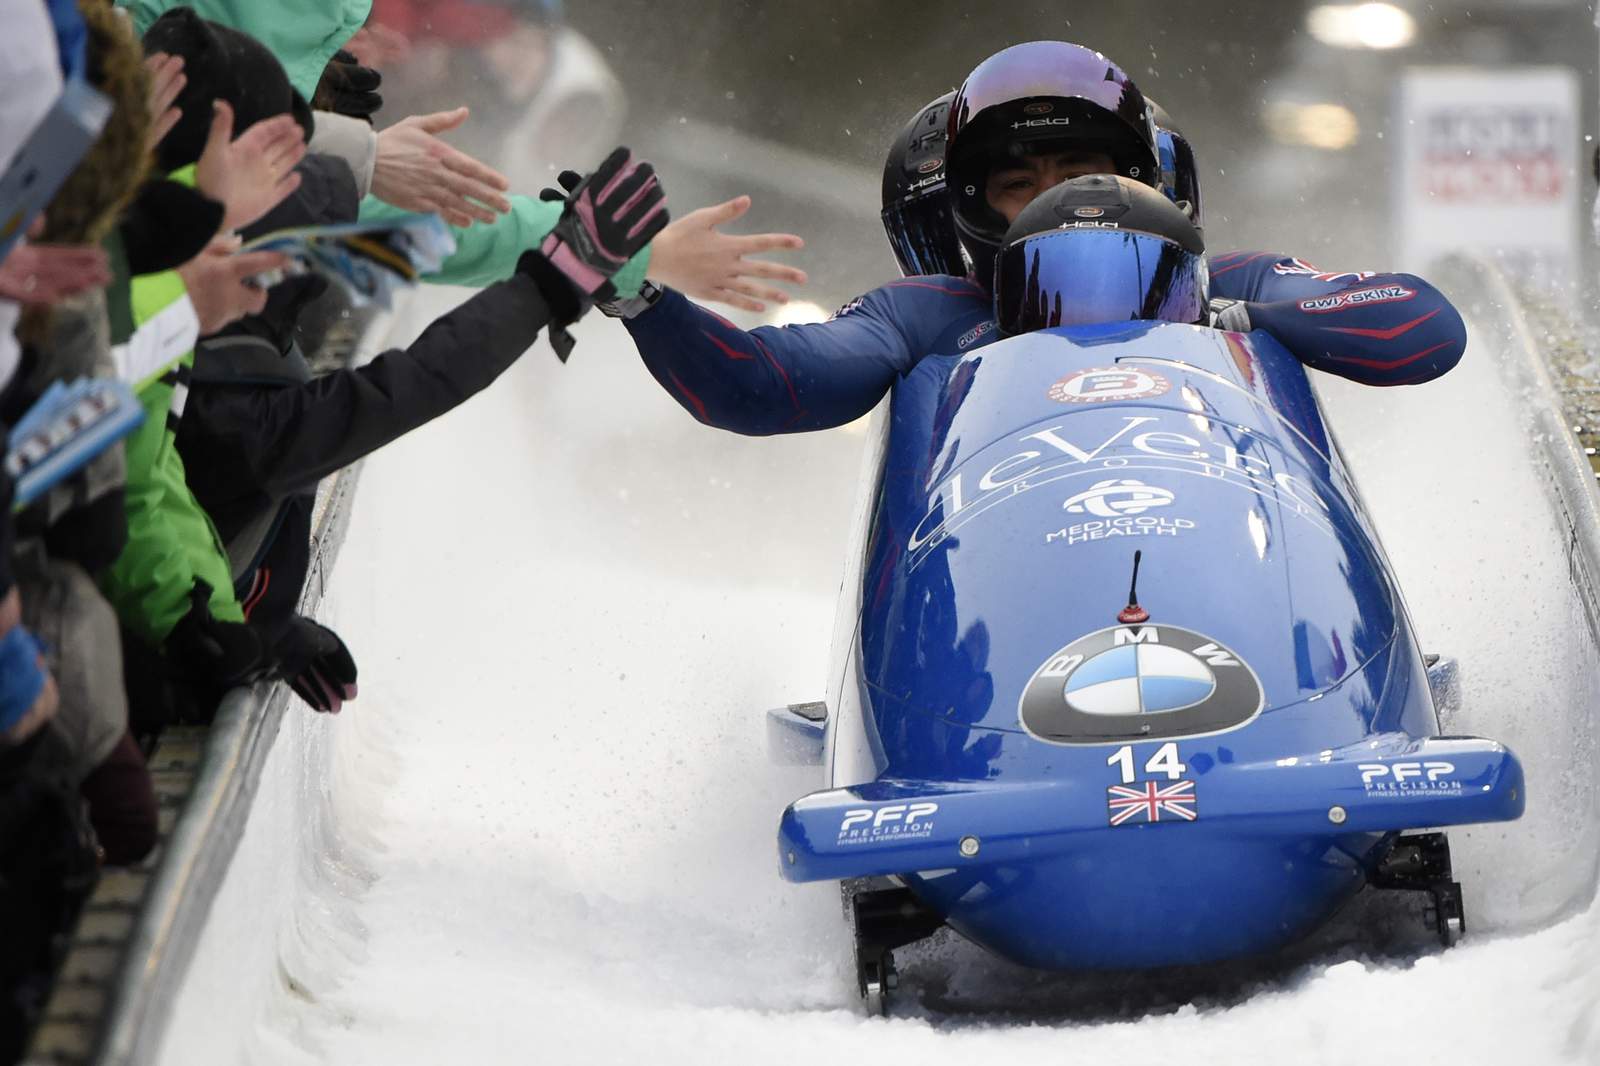 Bobsled worlds moved to Germany over coronavirus worries